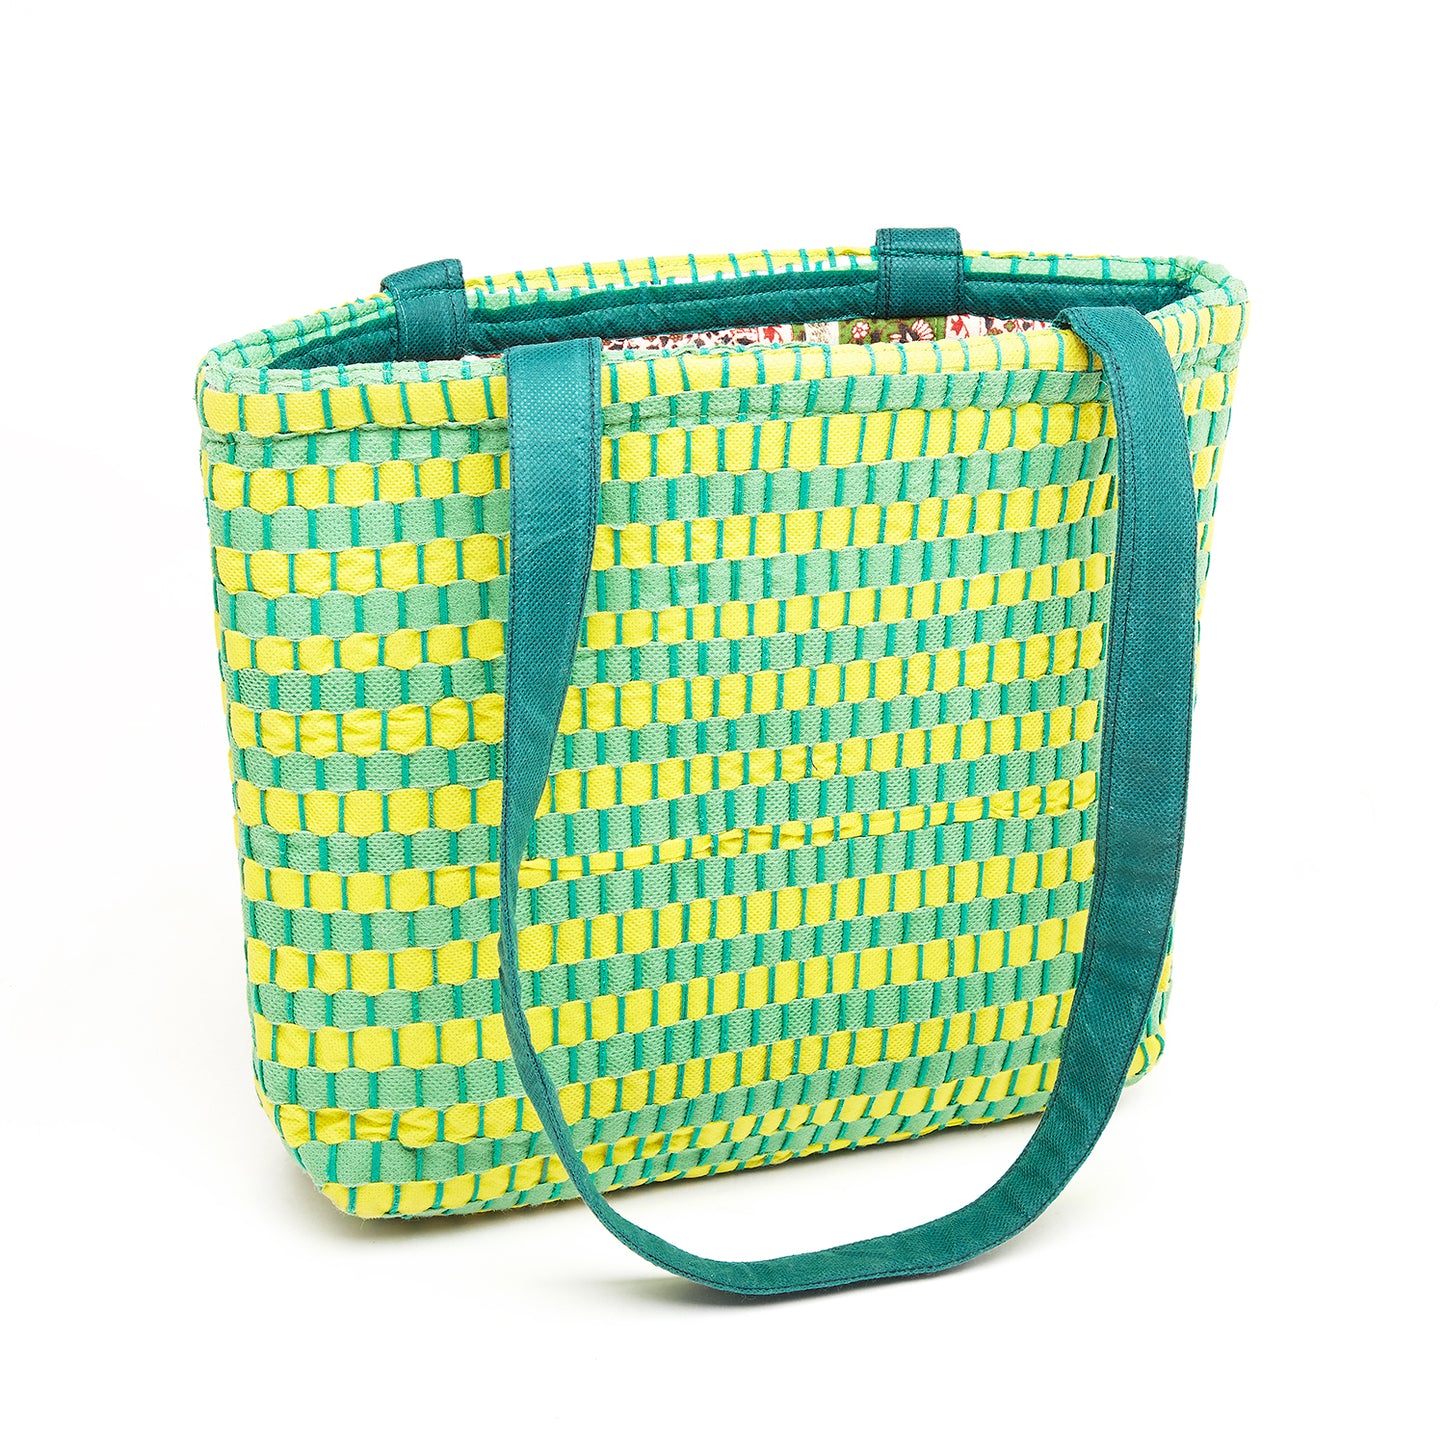 Fern Green & Yellow Colored Recycled Non-Woven Fabric Bag